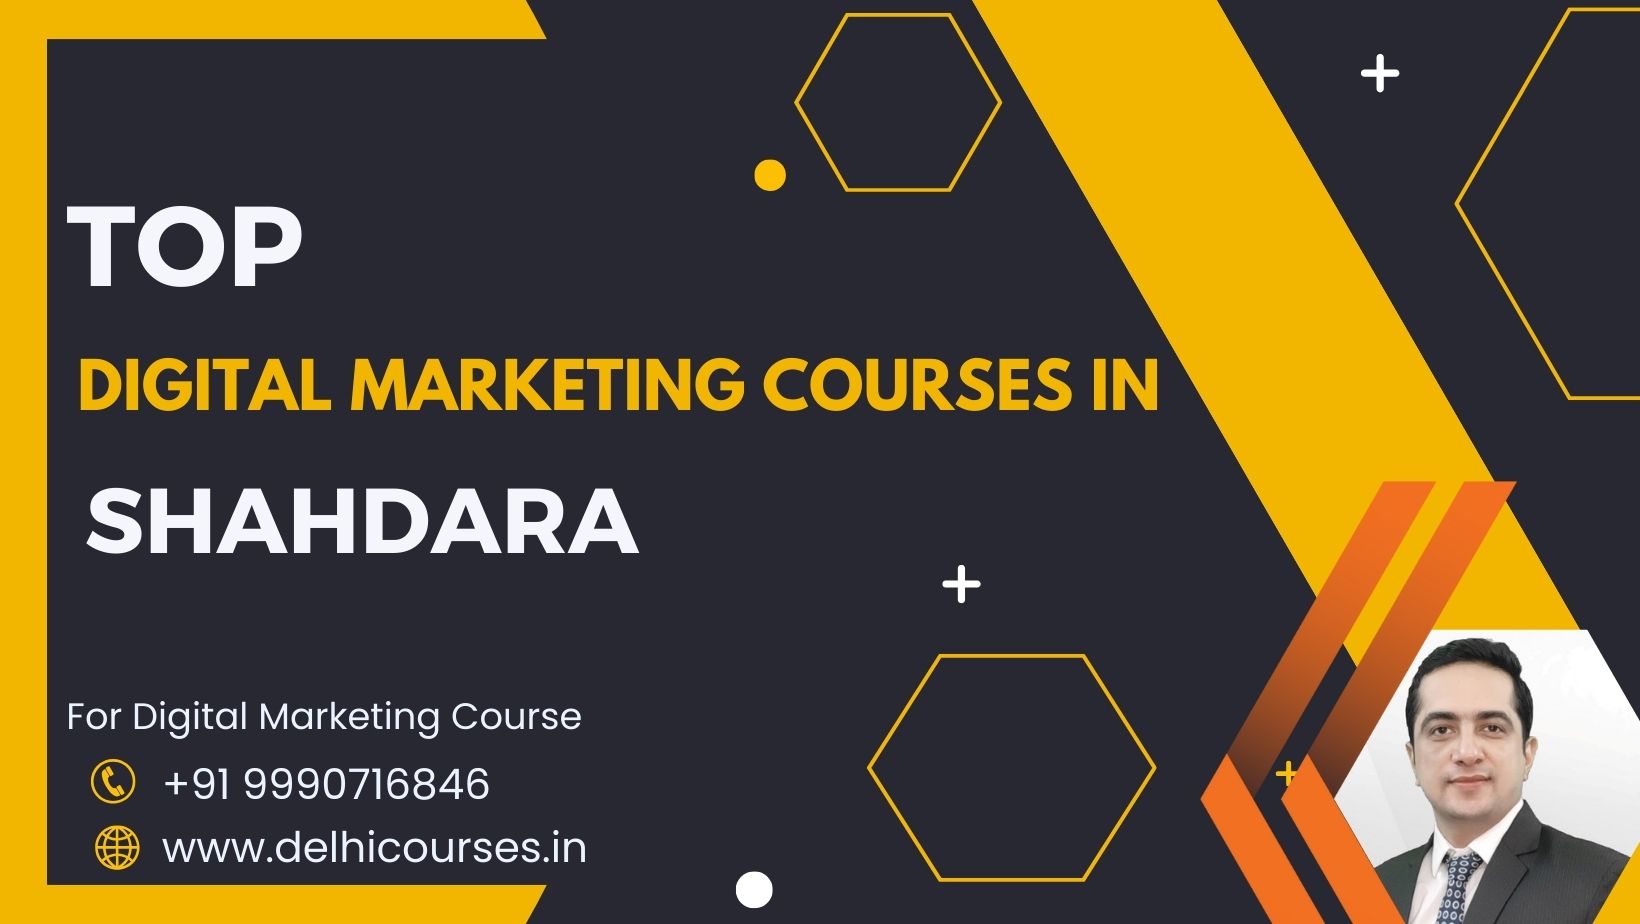 Top 5 Best Digital Marketing Courses in Shahdara With Job Placements & Fees